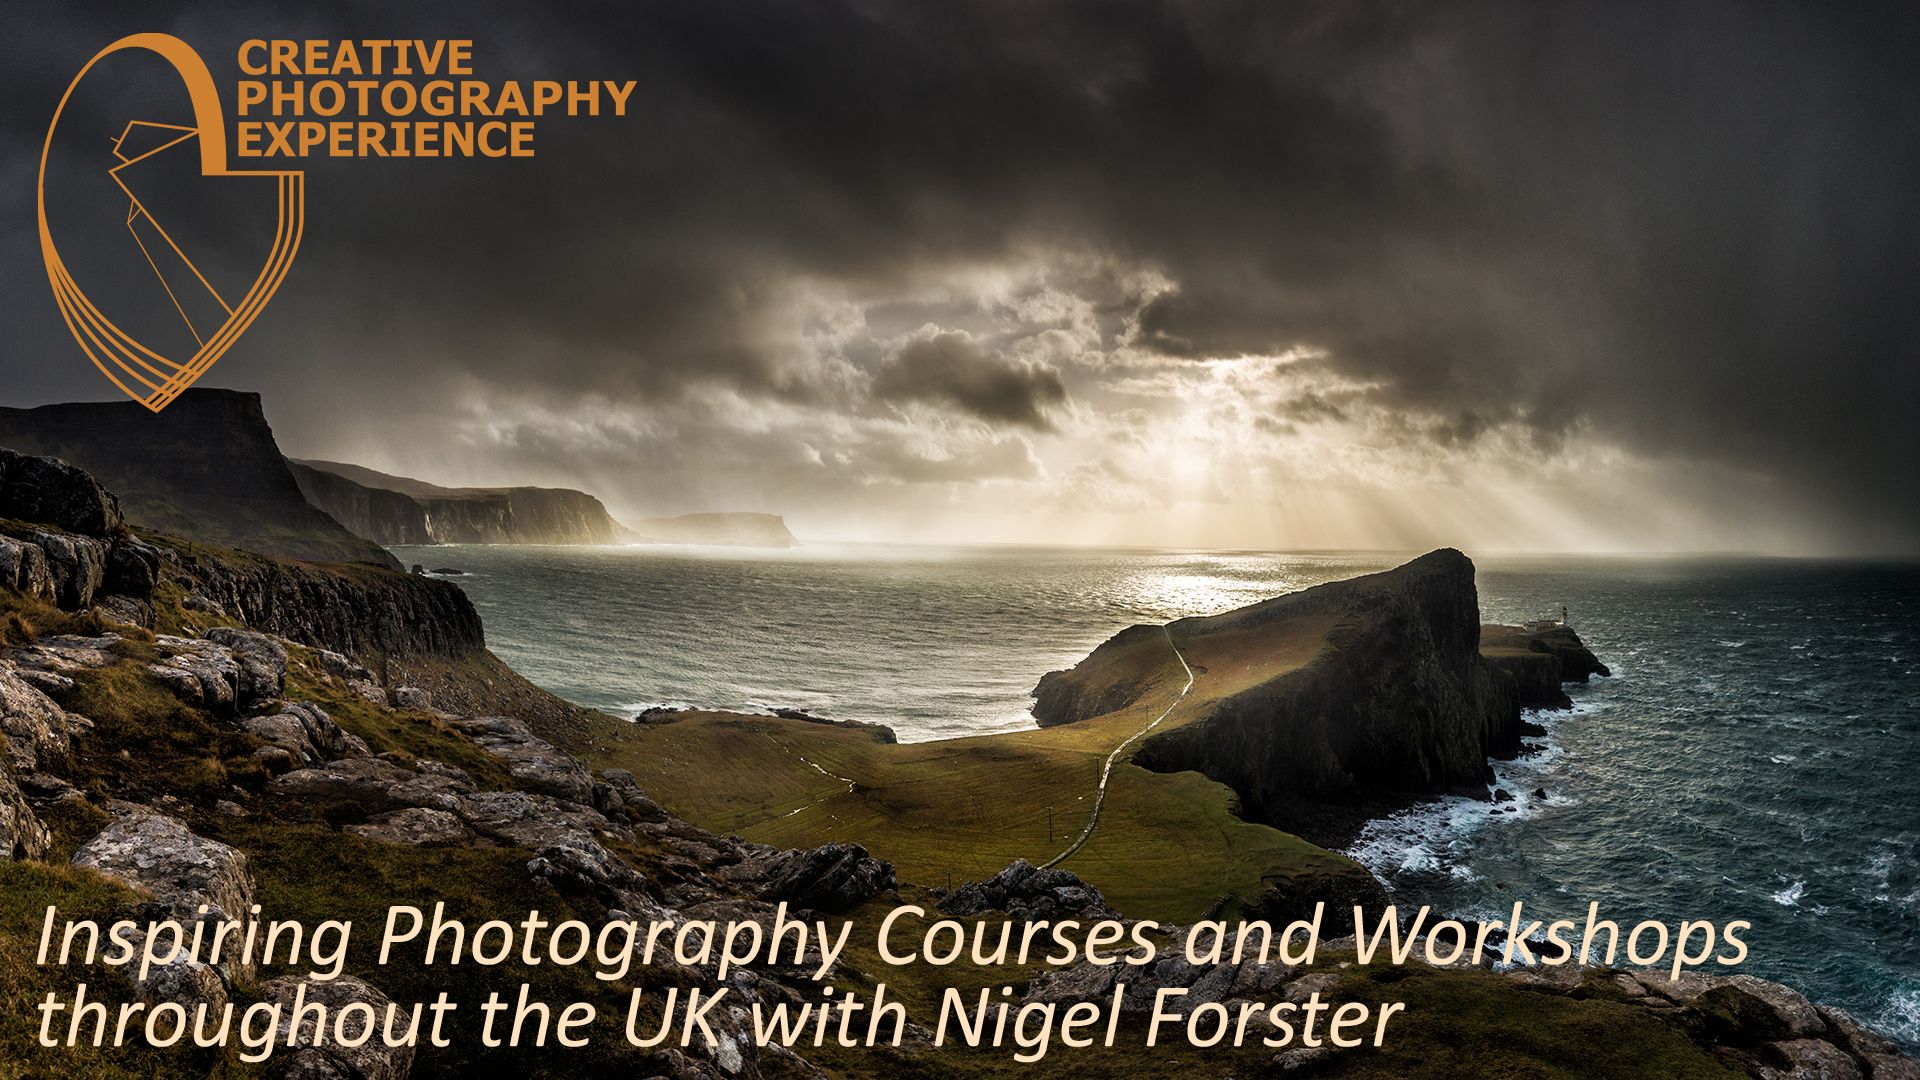 Inspiring Photography Workshops and Courses throughout the UK with Nigel Forster